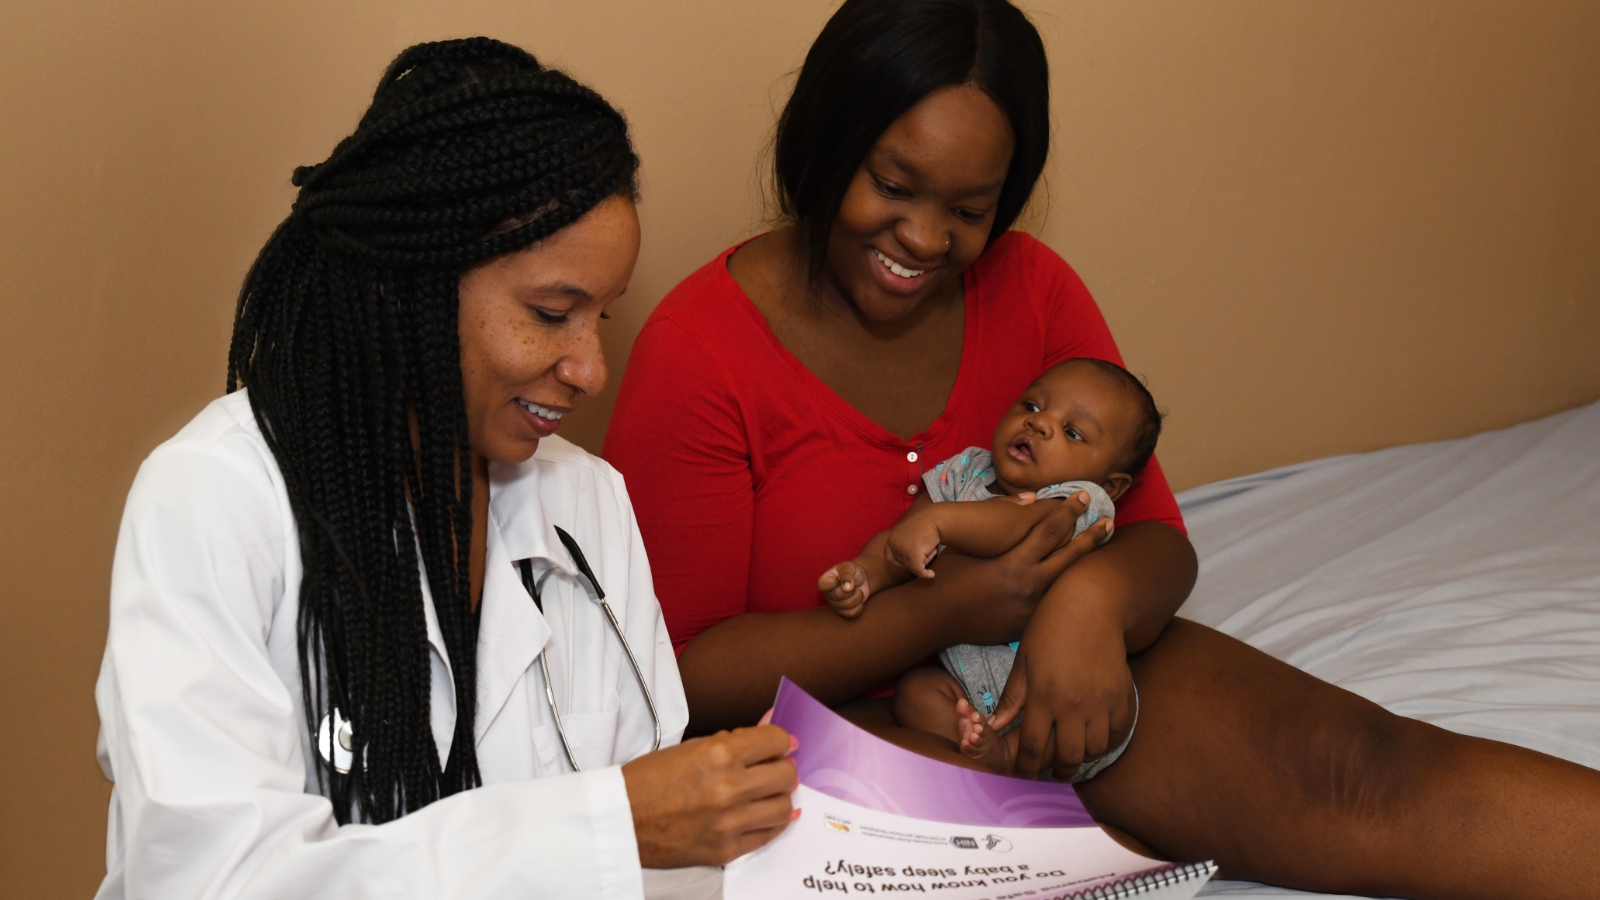 A healthcare provider (left) going over materials with a mother (right) who is holding a baby